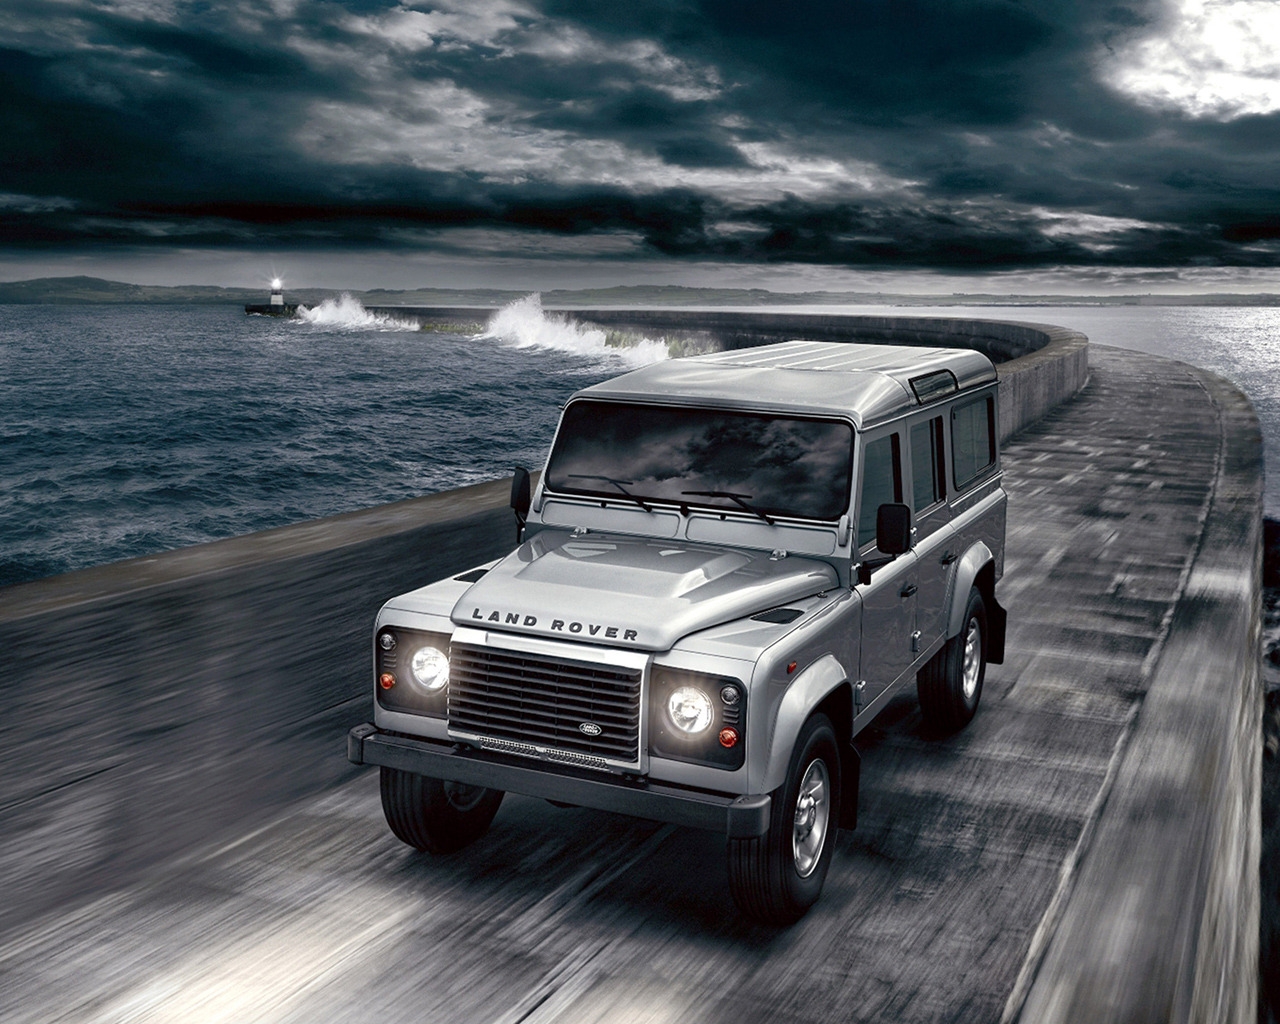 2012 Land Rover Defender for 1280 x 1024 resolution